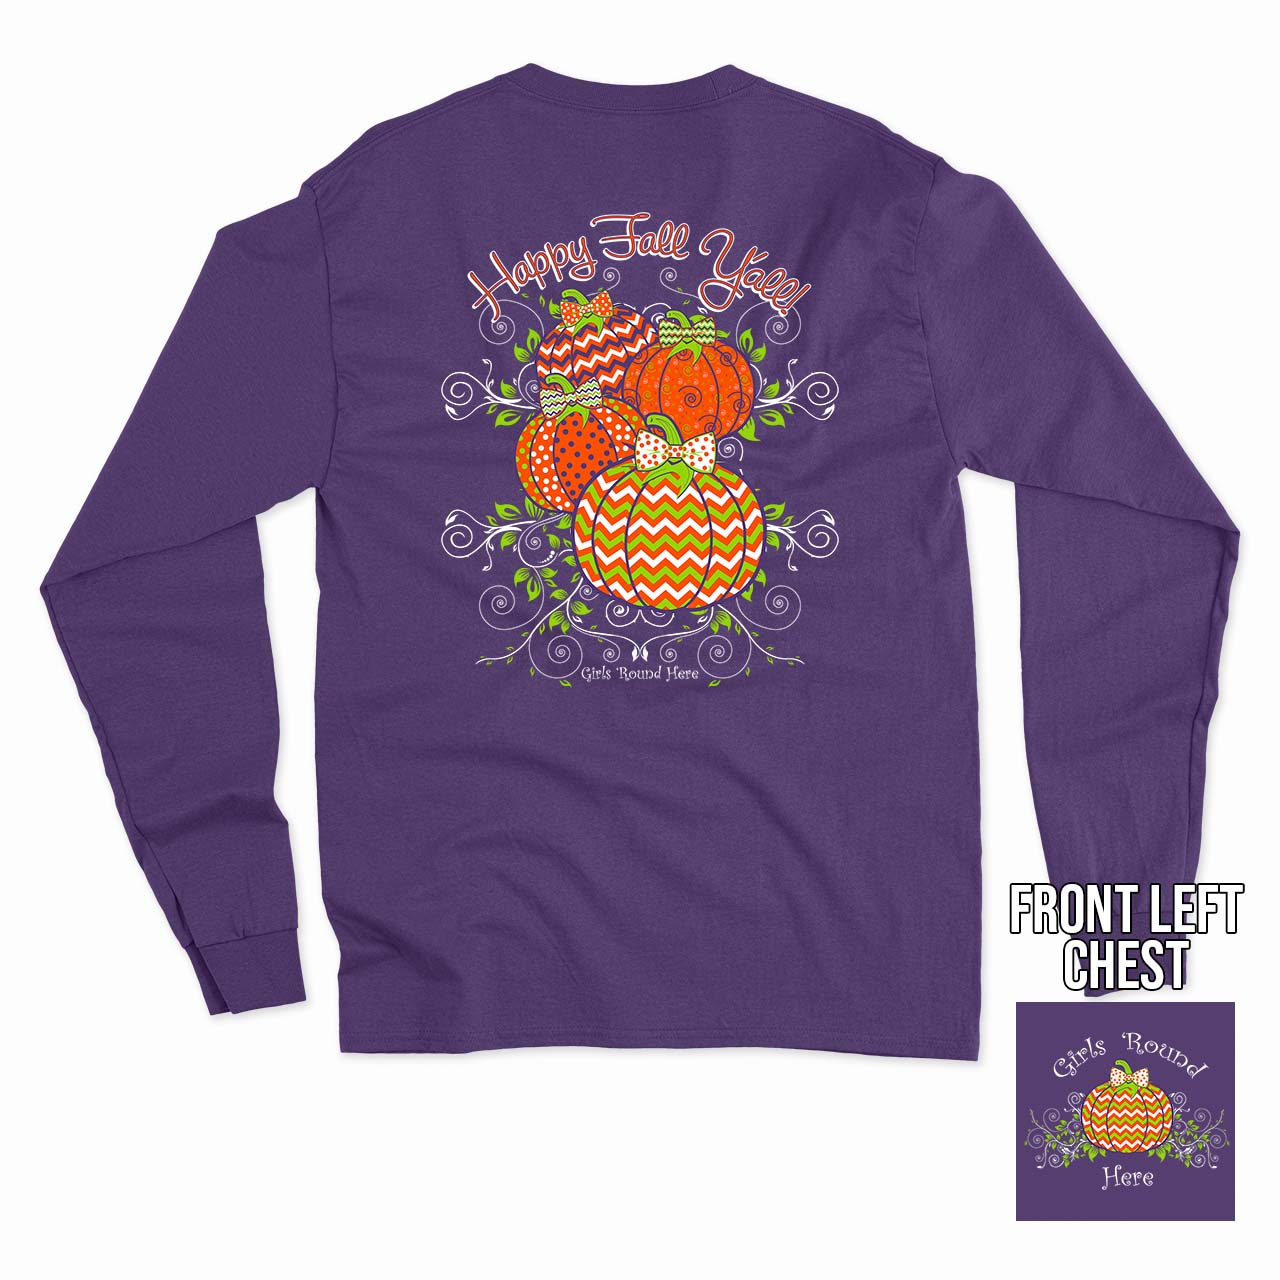 Girls 'Round Here Happy Fall Y'all Long Sleeve